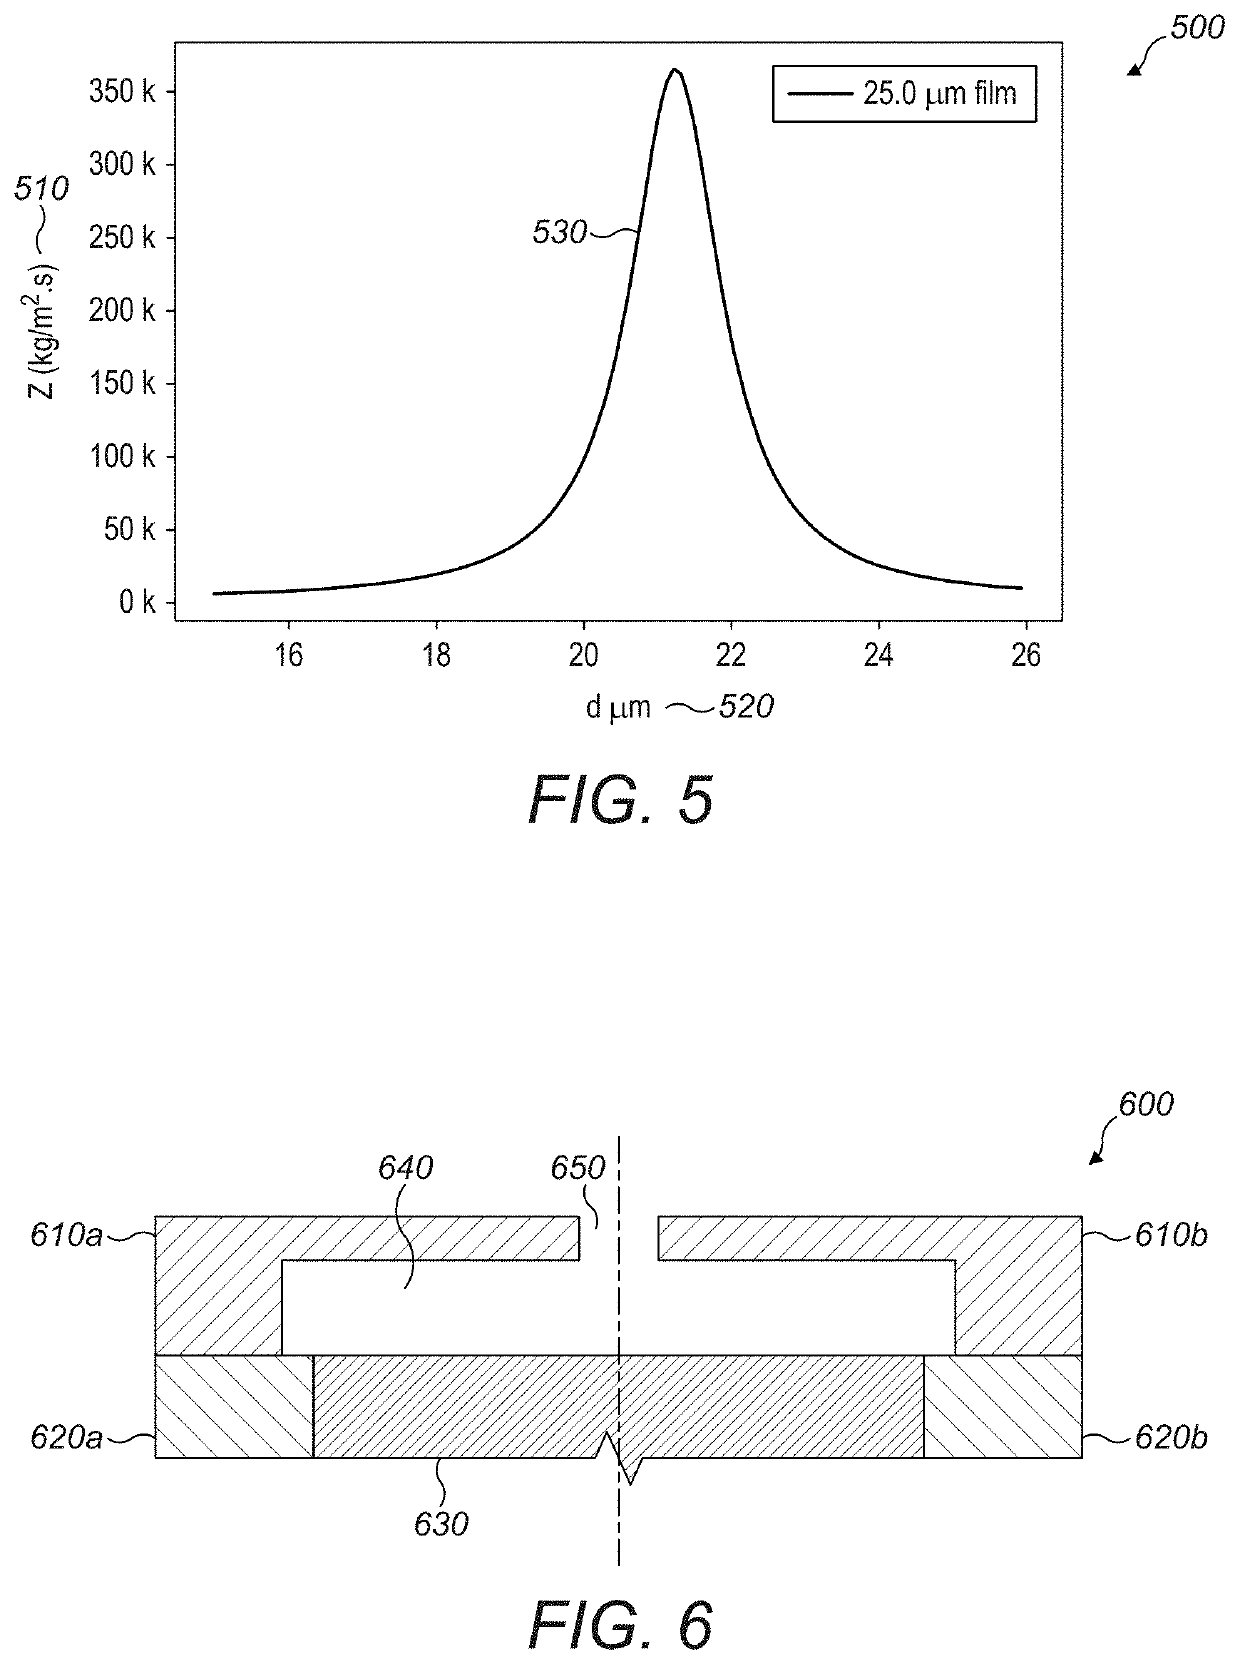 Blocking Plate Structure for Improved Acoustic Transmission Efficiency